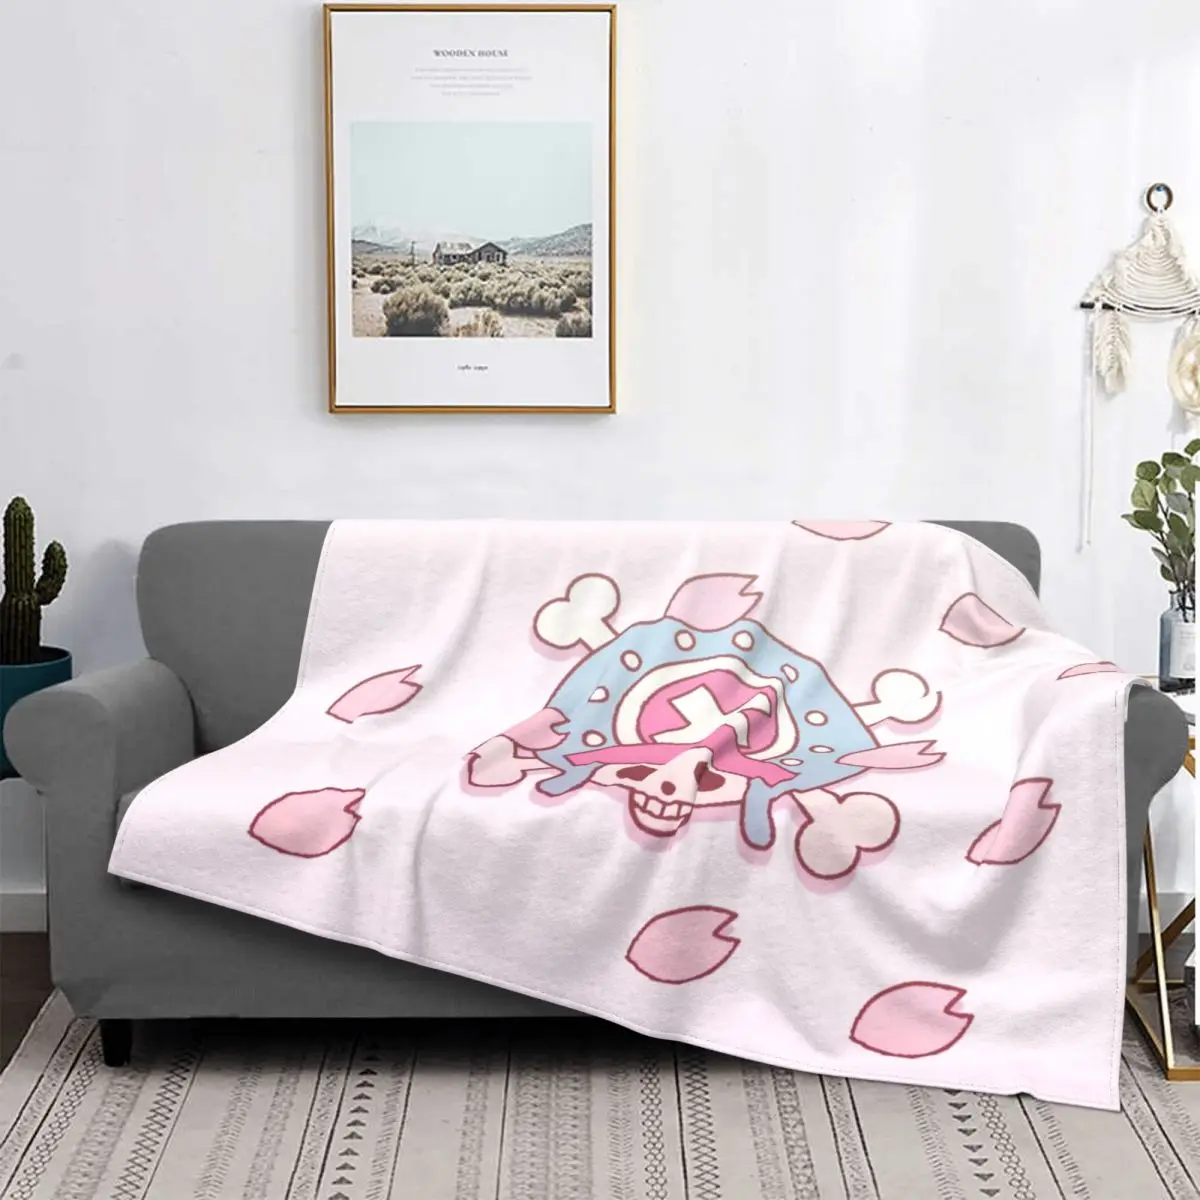 

Pirate TONY TONY Chopper Blankets Fleece Autumn Sakura Blossoms Portable Super Warm Throw Blankets for Bed Office Bedspreads